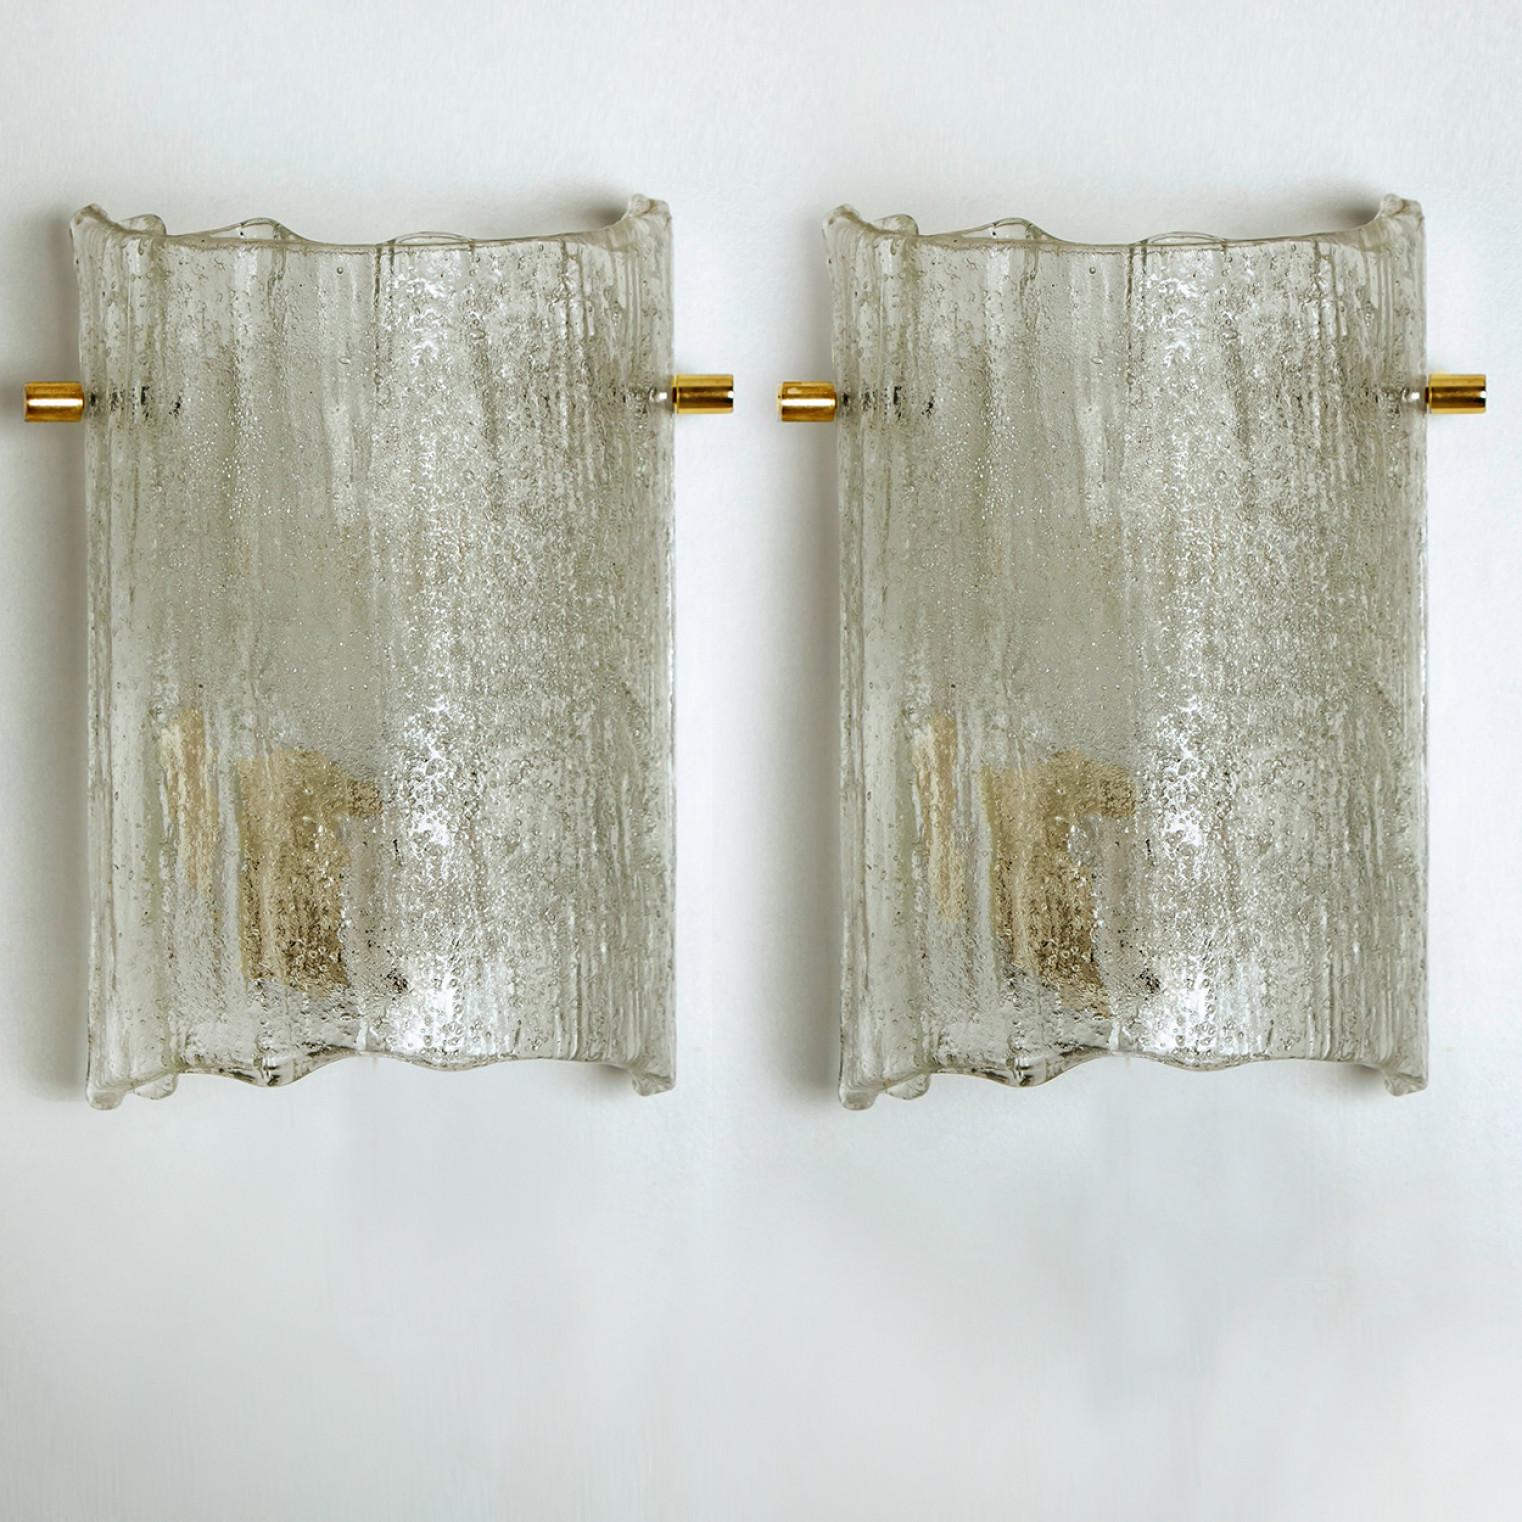 Massive Glass Wall Light Fixtures by J.T. Kalmar, 1960 In Good Condition For Sale In Rijssen, NL